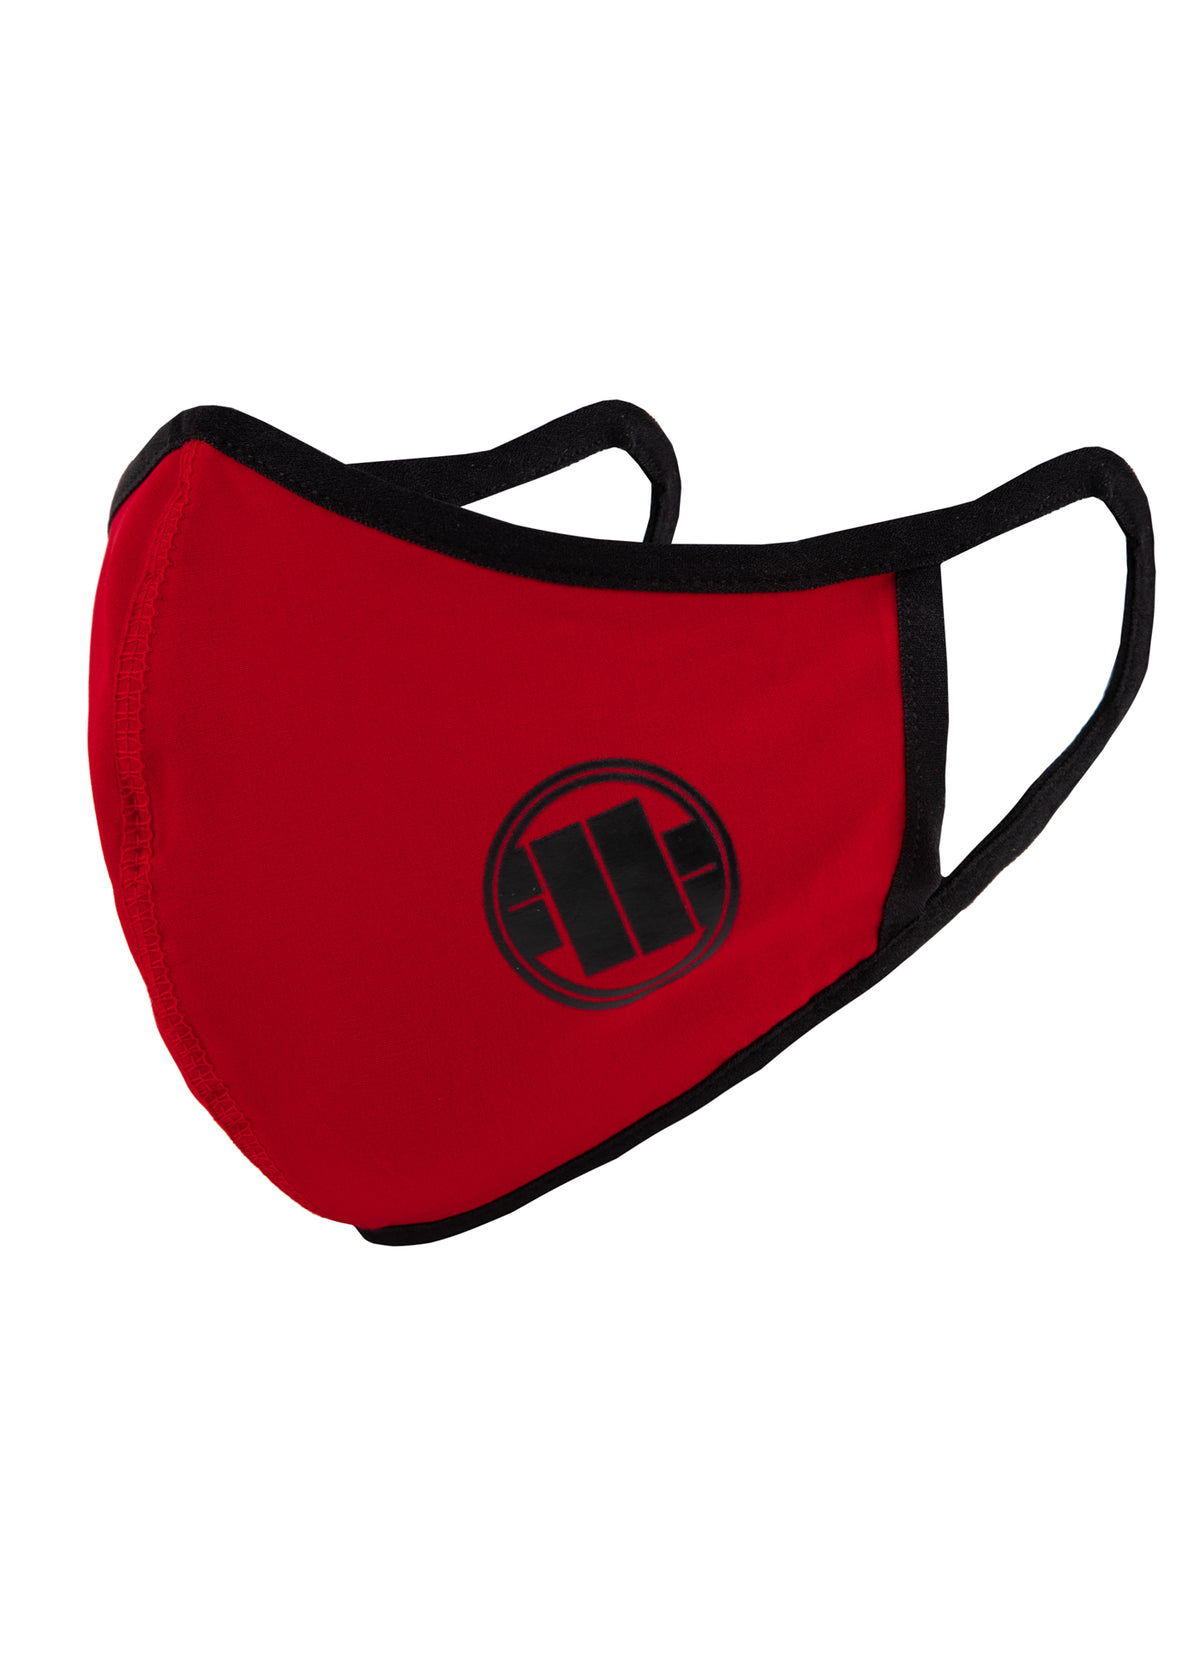 Face mask LOGO Red.